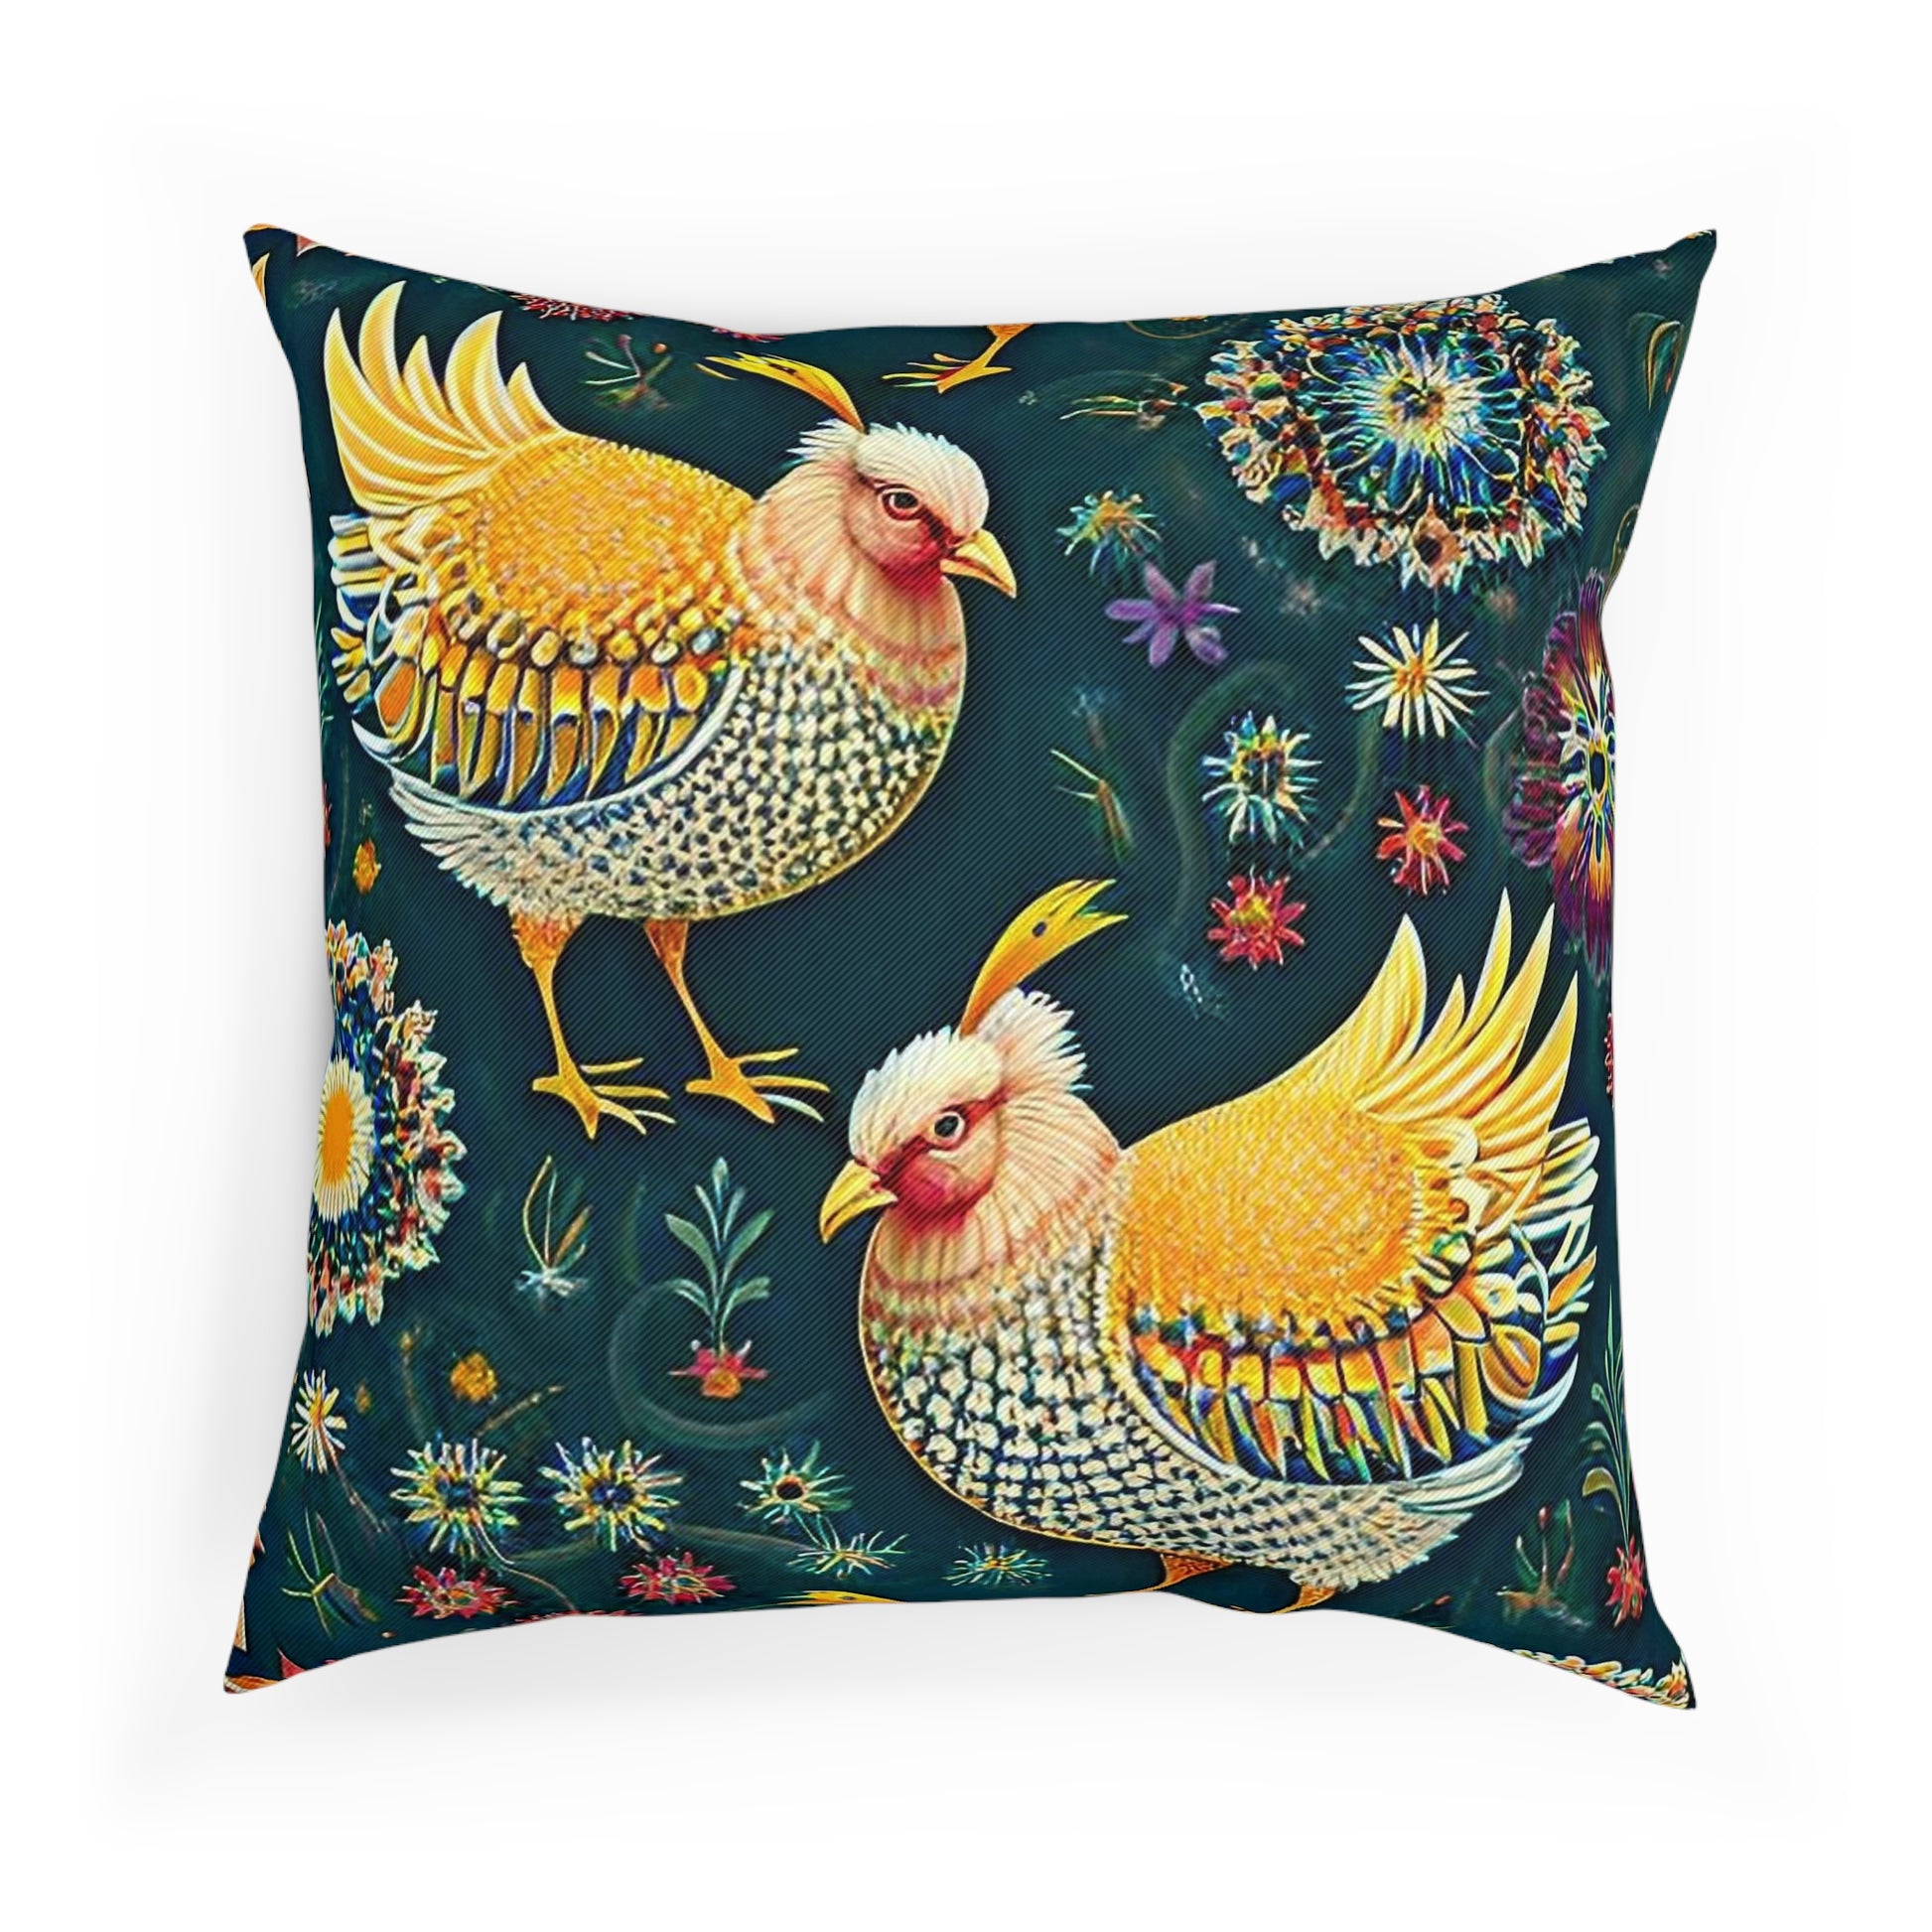 Fancy Hens Chickens Art Print Throw Pillow 100% Cotton Cushion Cover